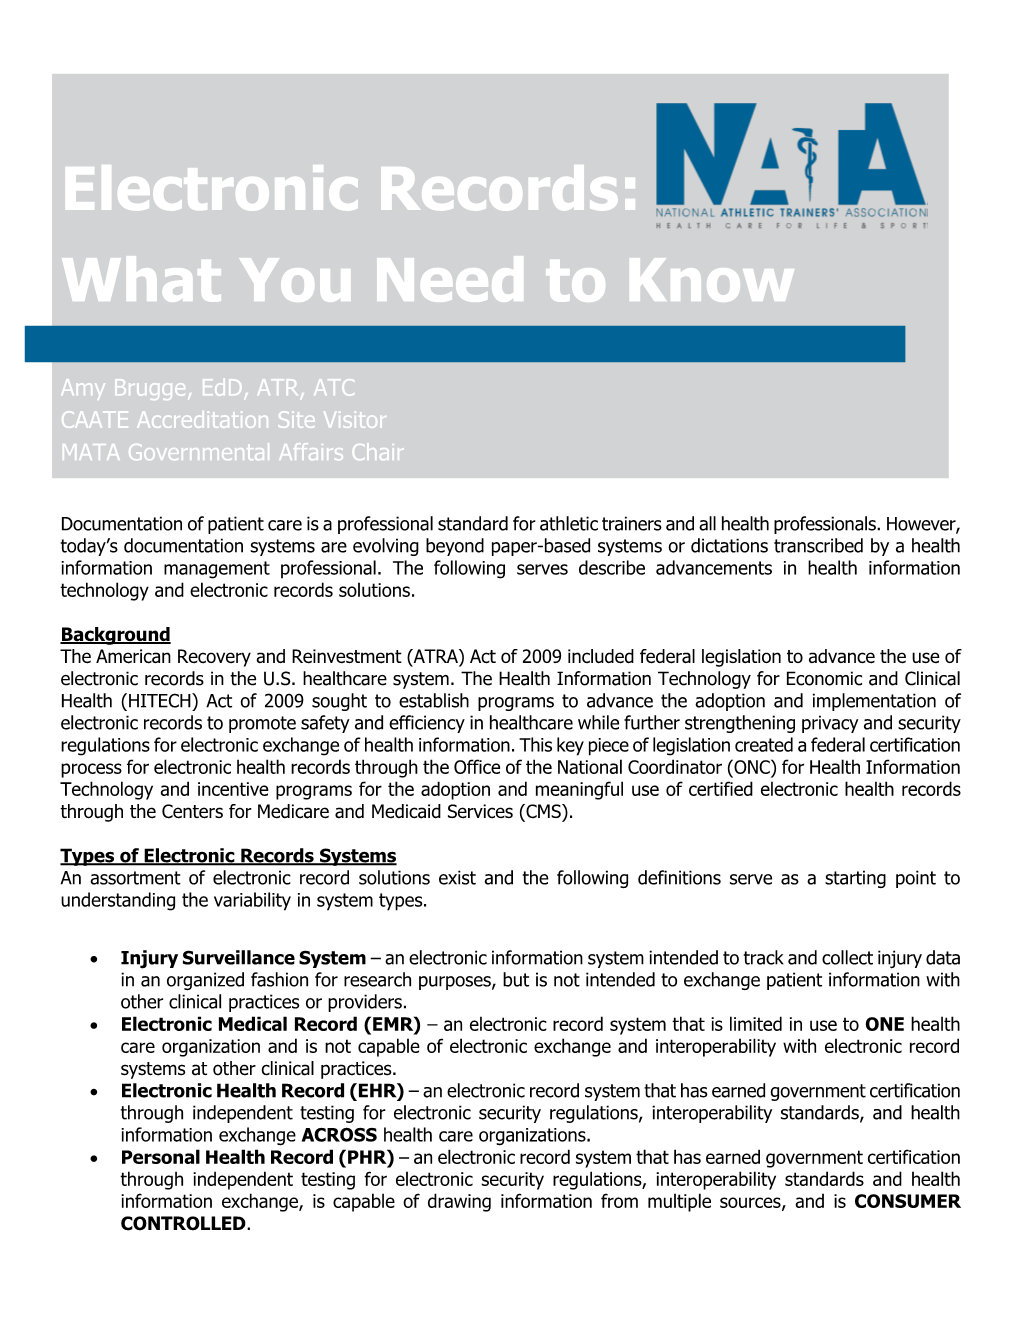 Electronic Records: What You Need to Know